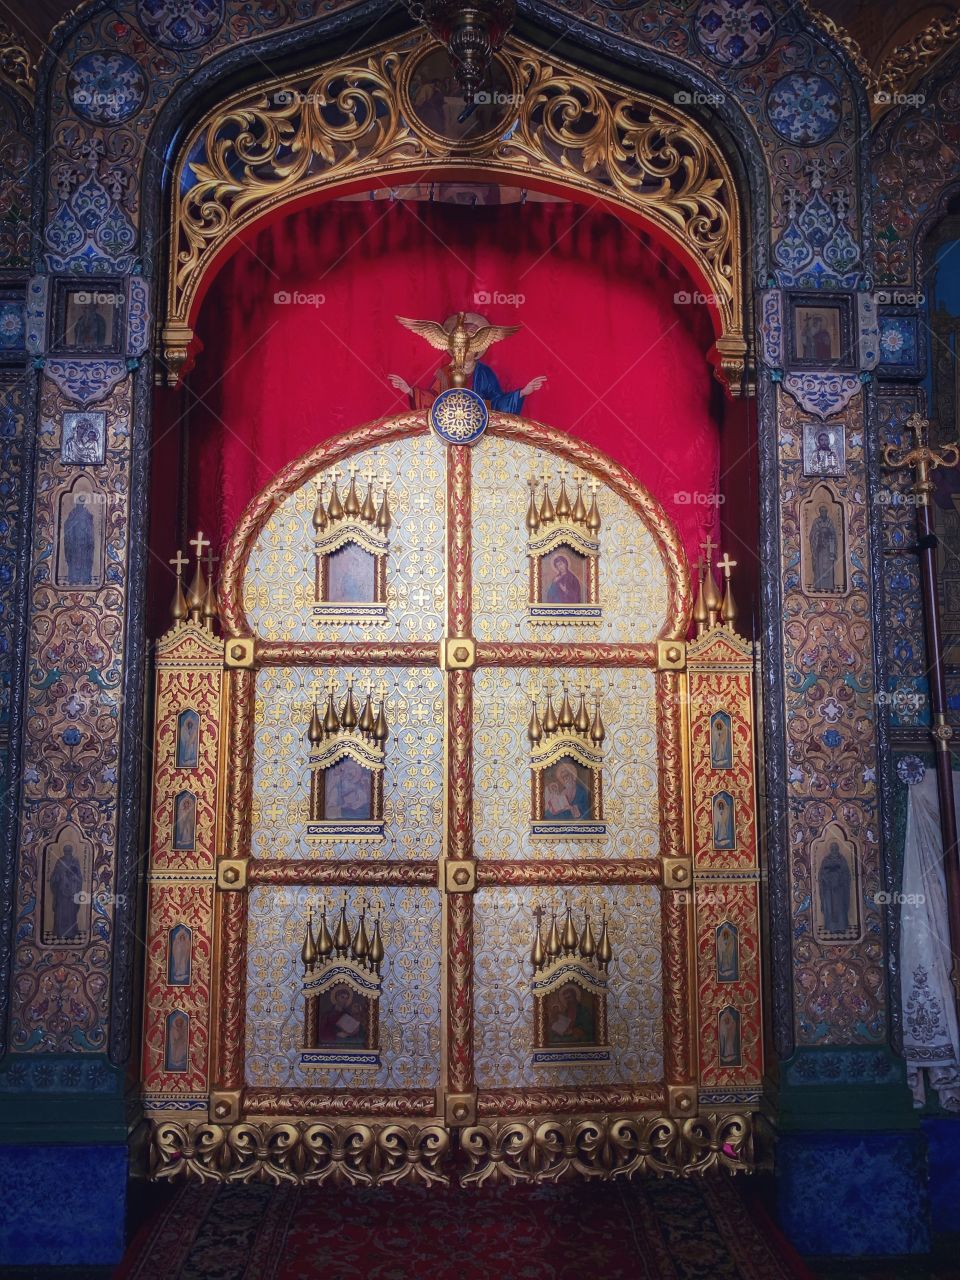 The altar doors of the Russian church in central Sofia, Bulgaria - amazing mix of color, art and history